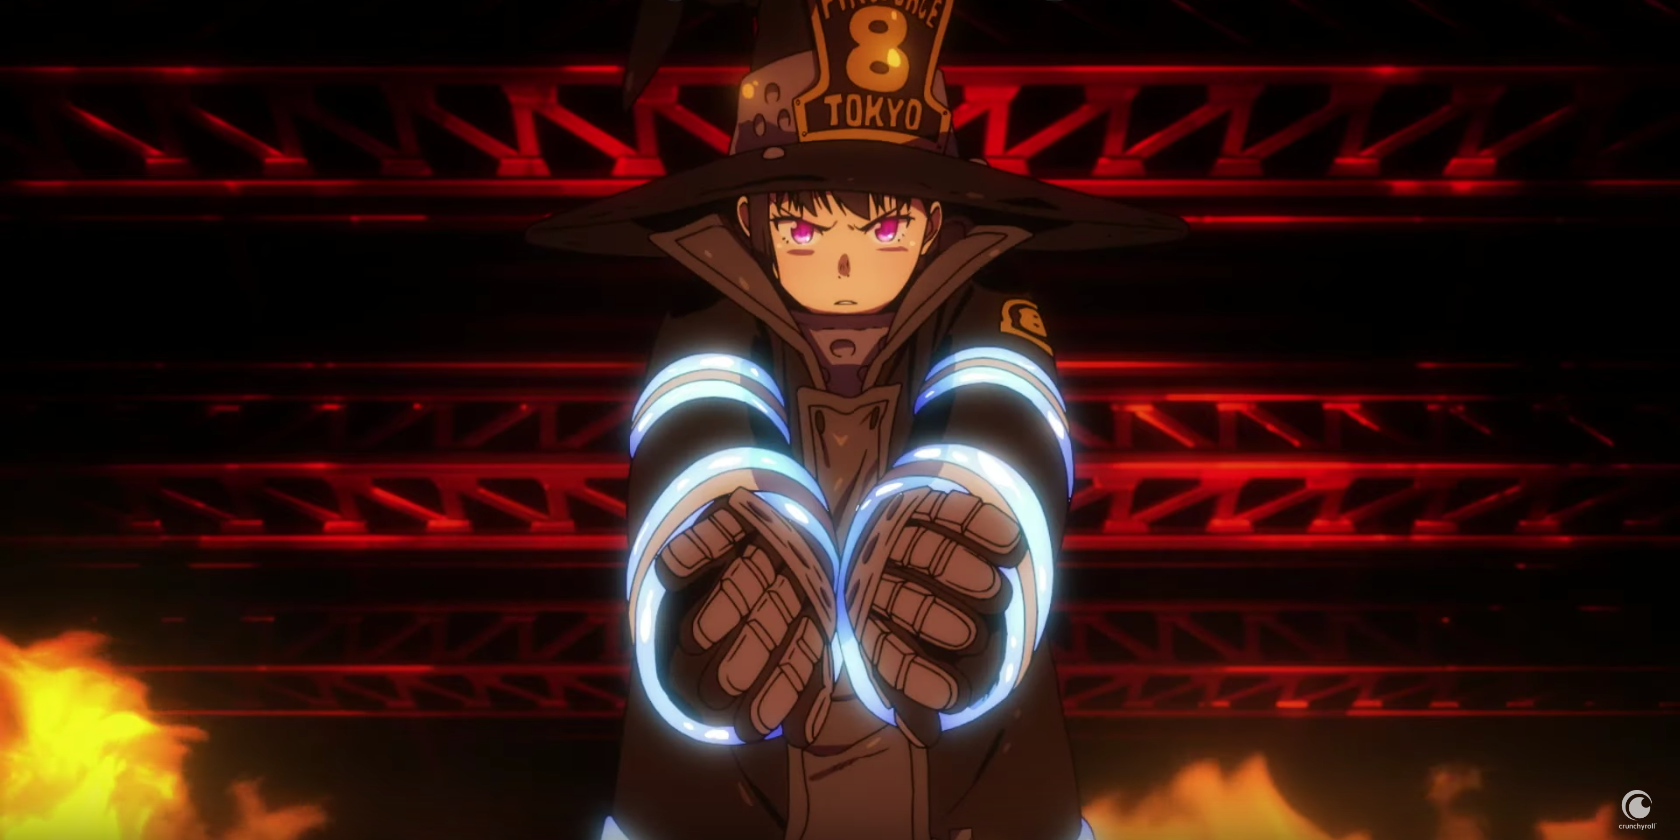 Fire Force's Creator May Retire Before Much Longer